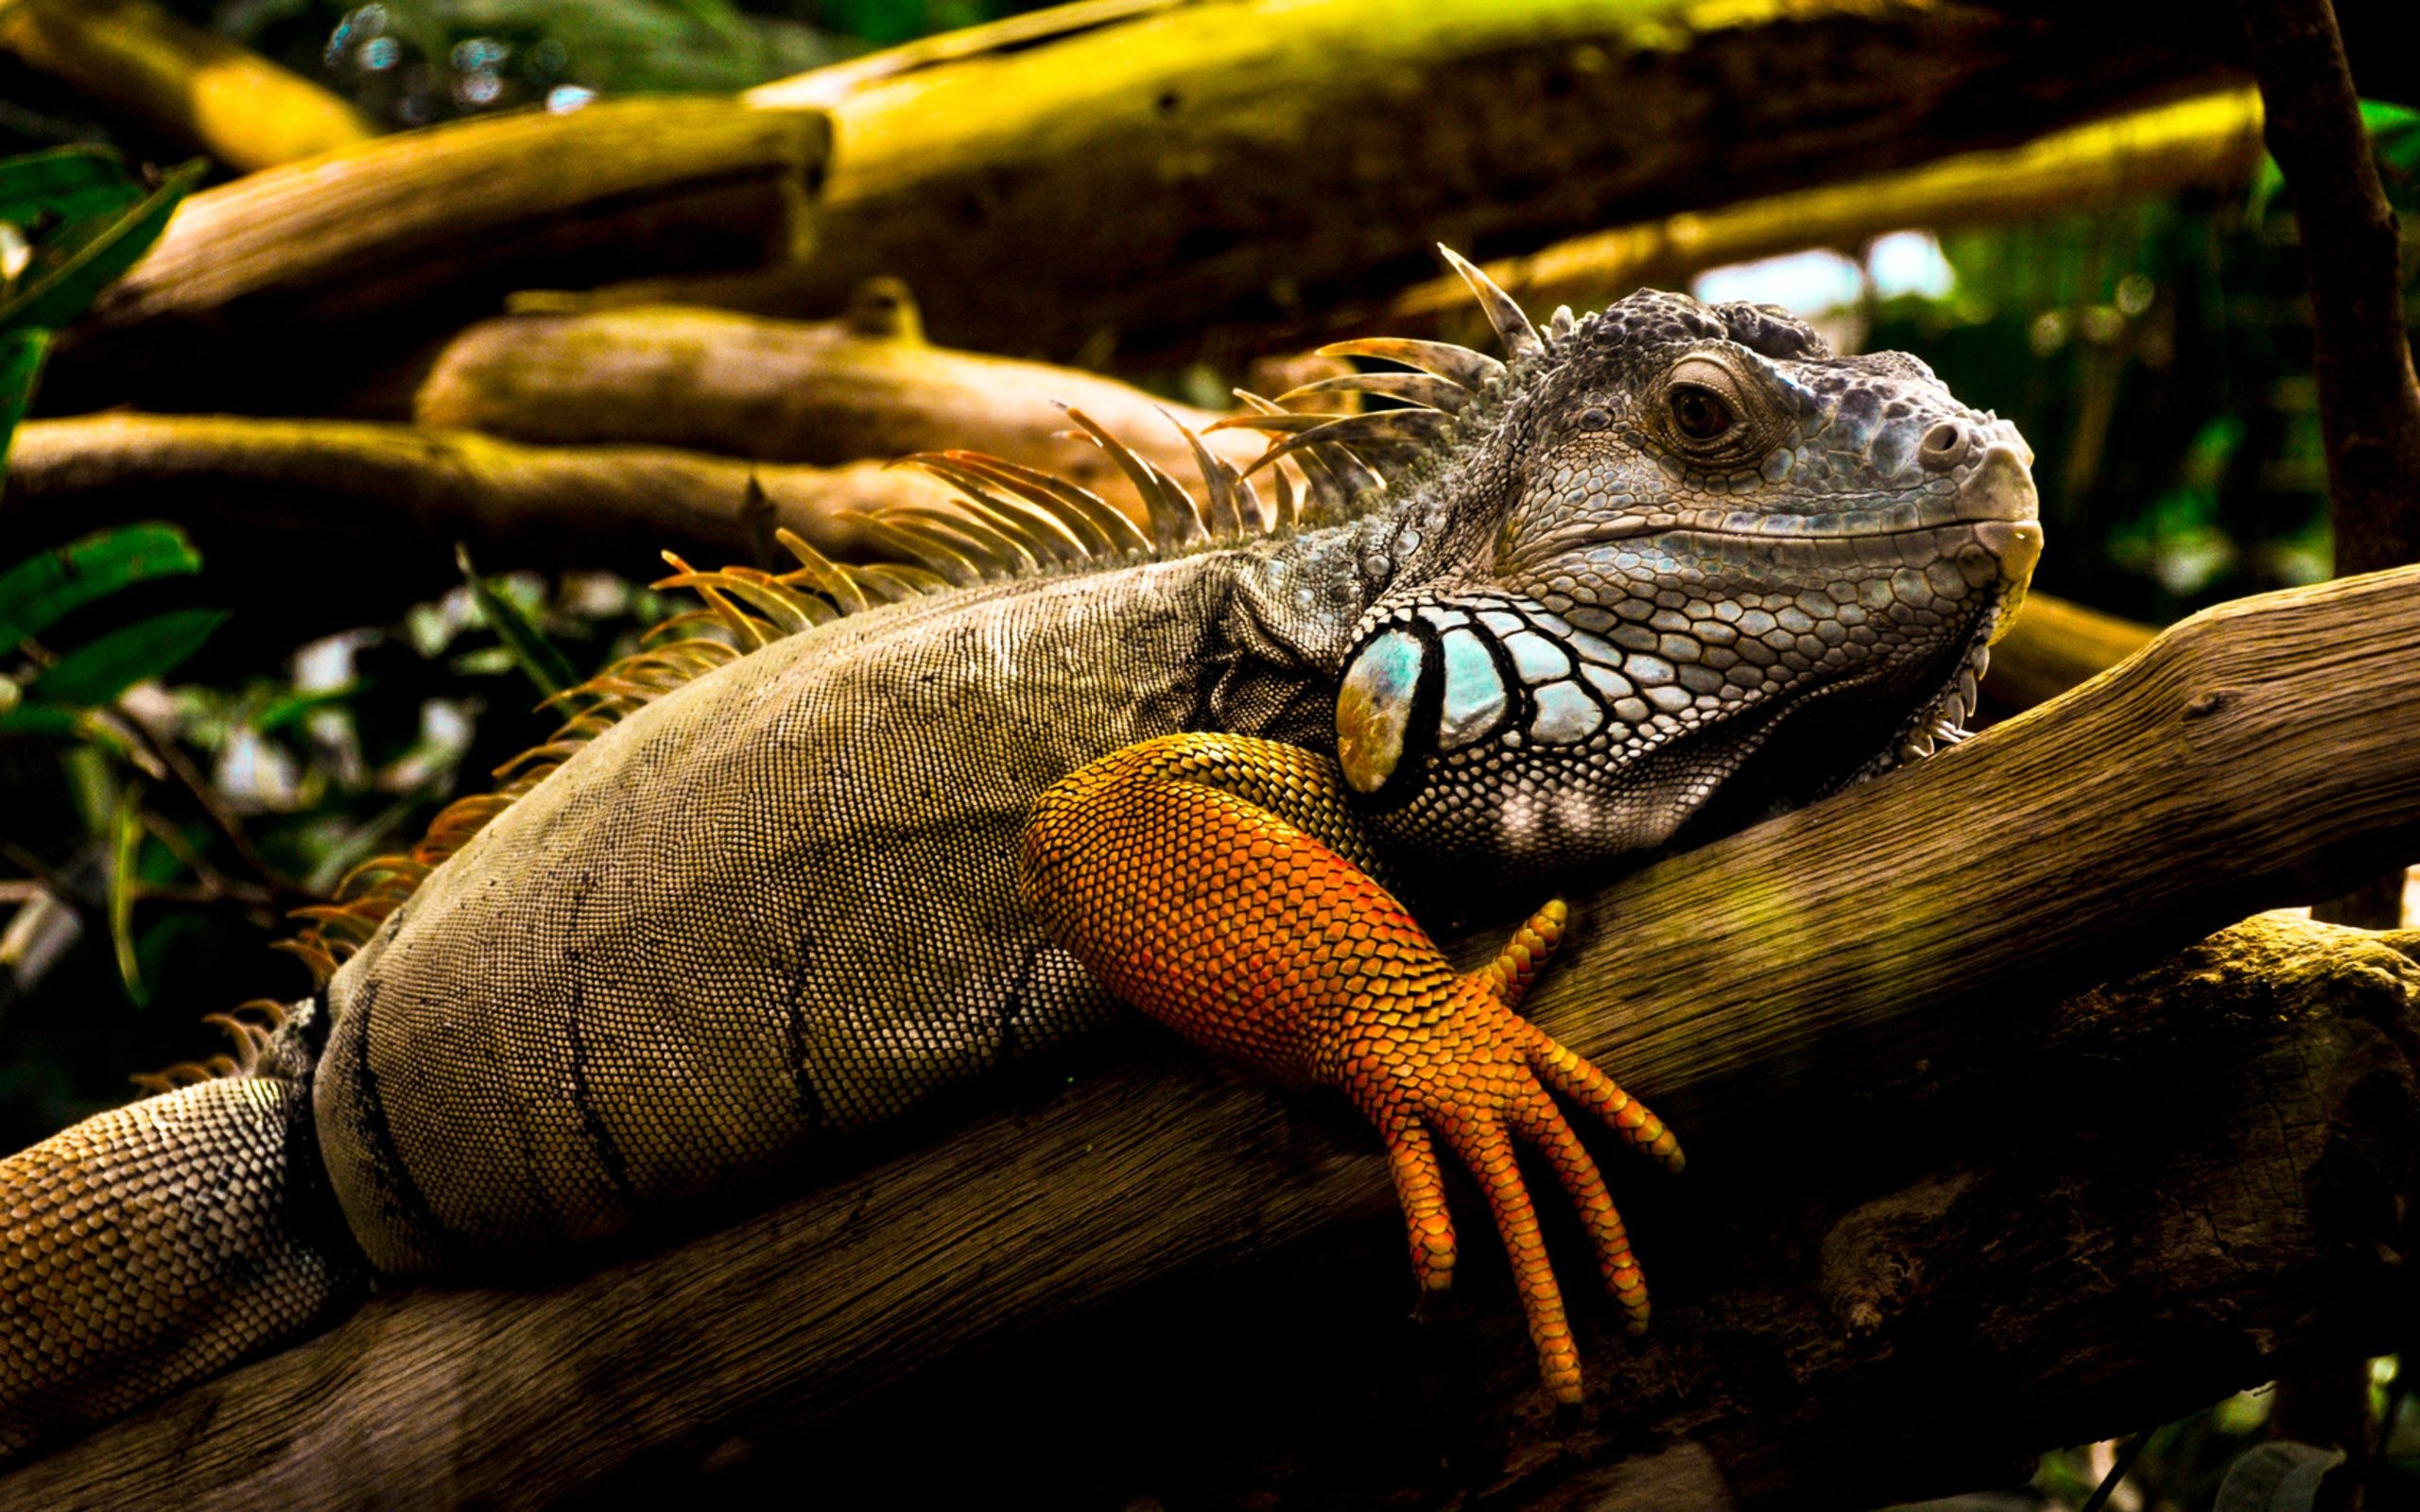 Iguana wallpapers, Stunning reptile, Colorful scales, Nature background, 2560x1600 HD Desktop